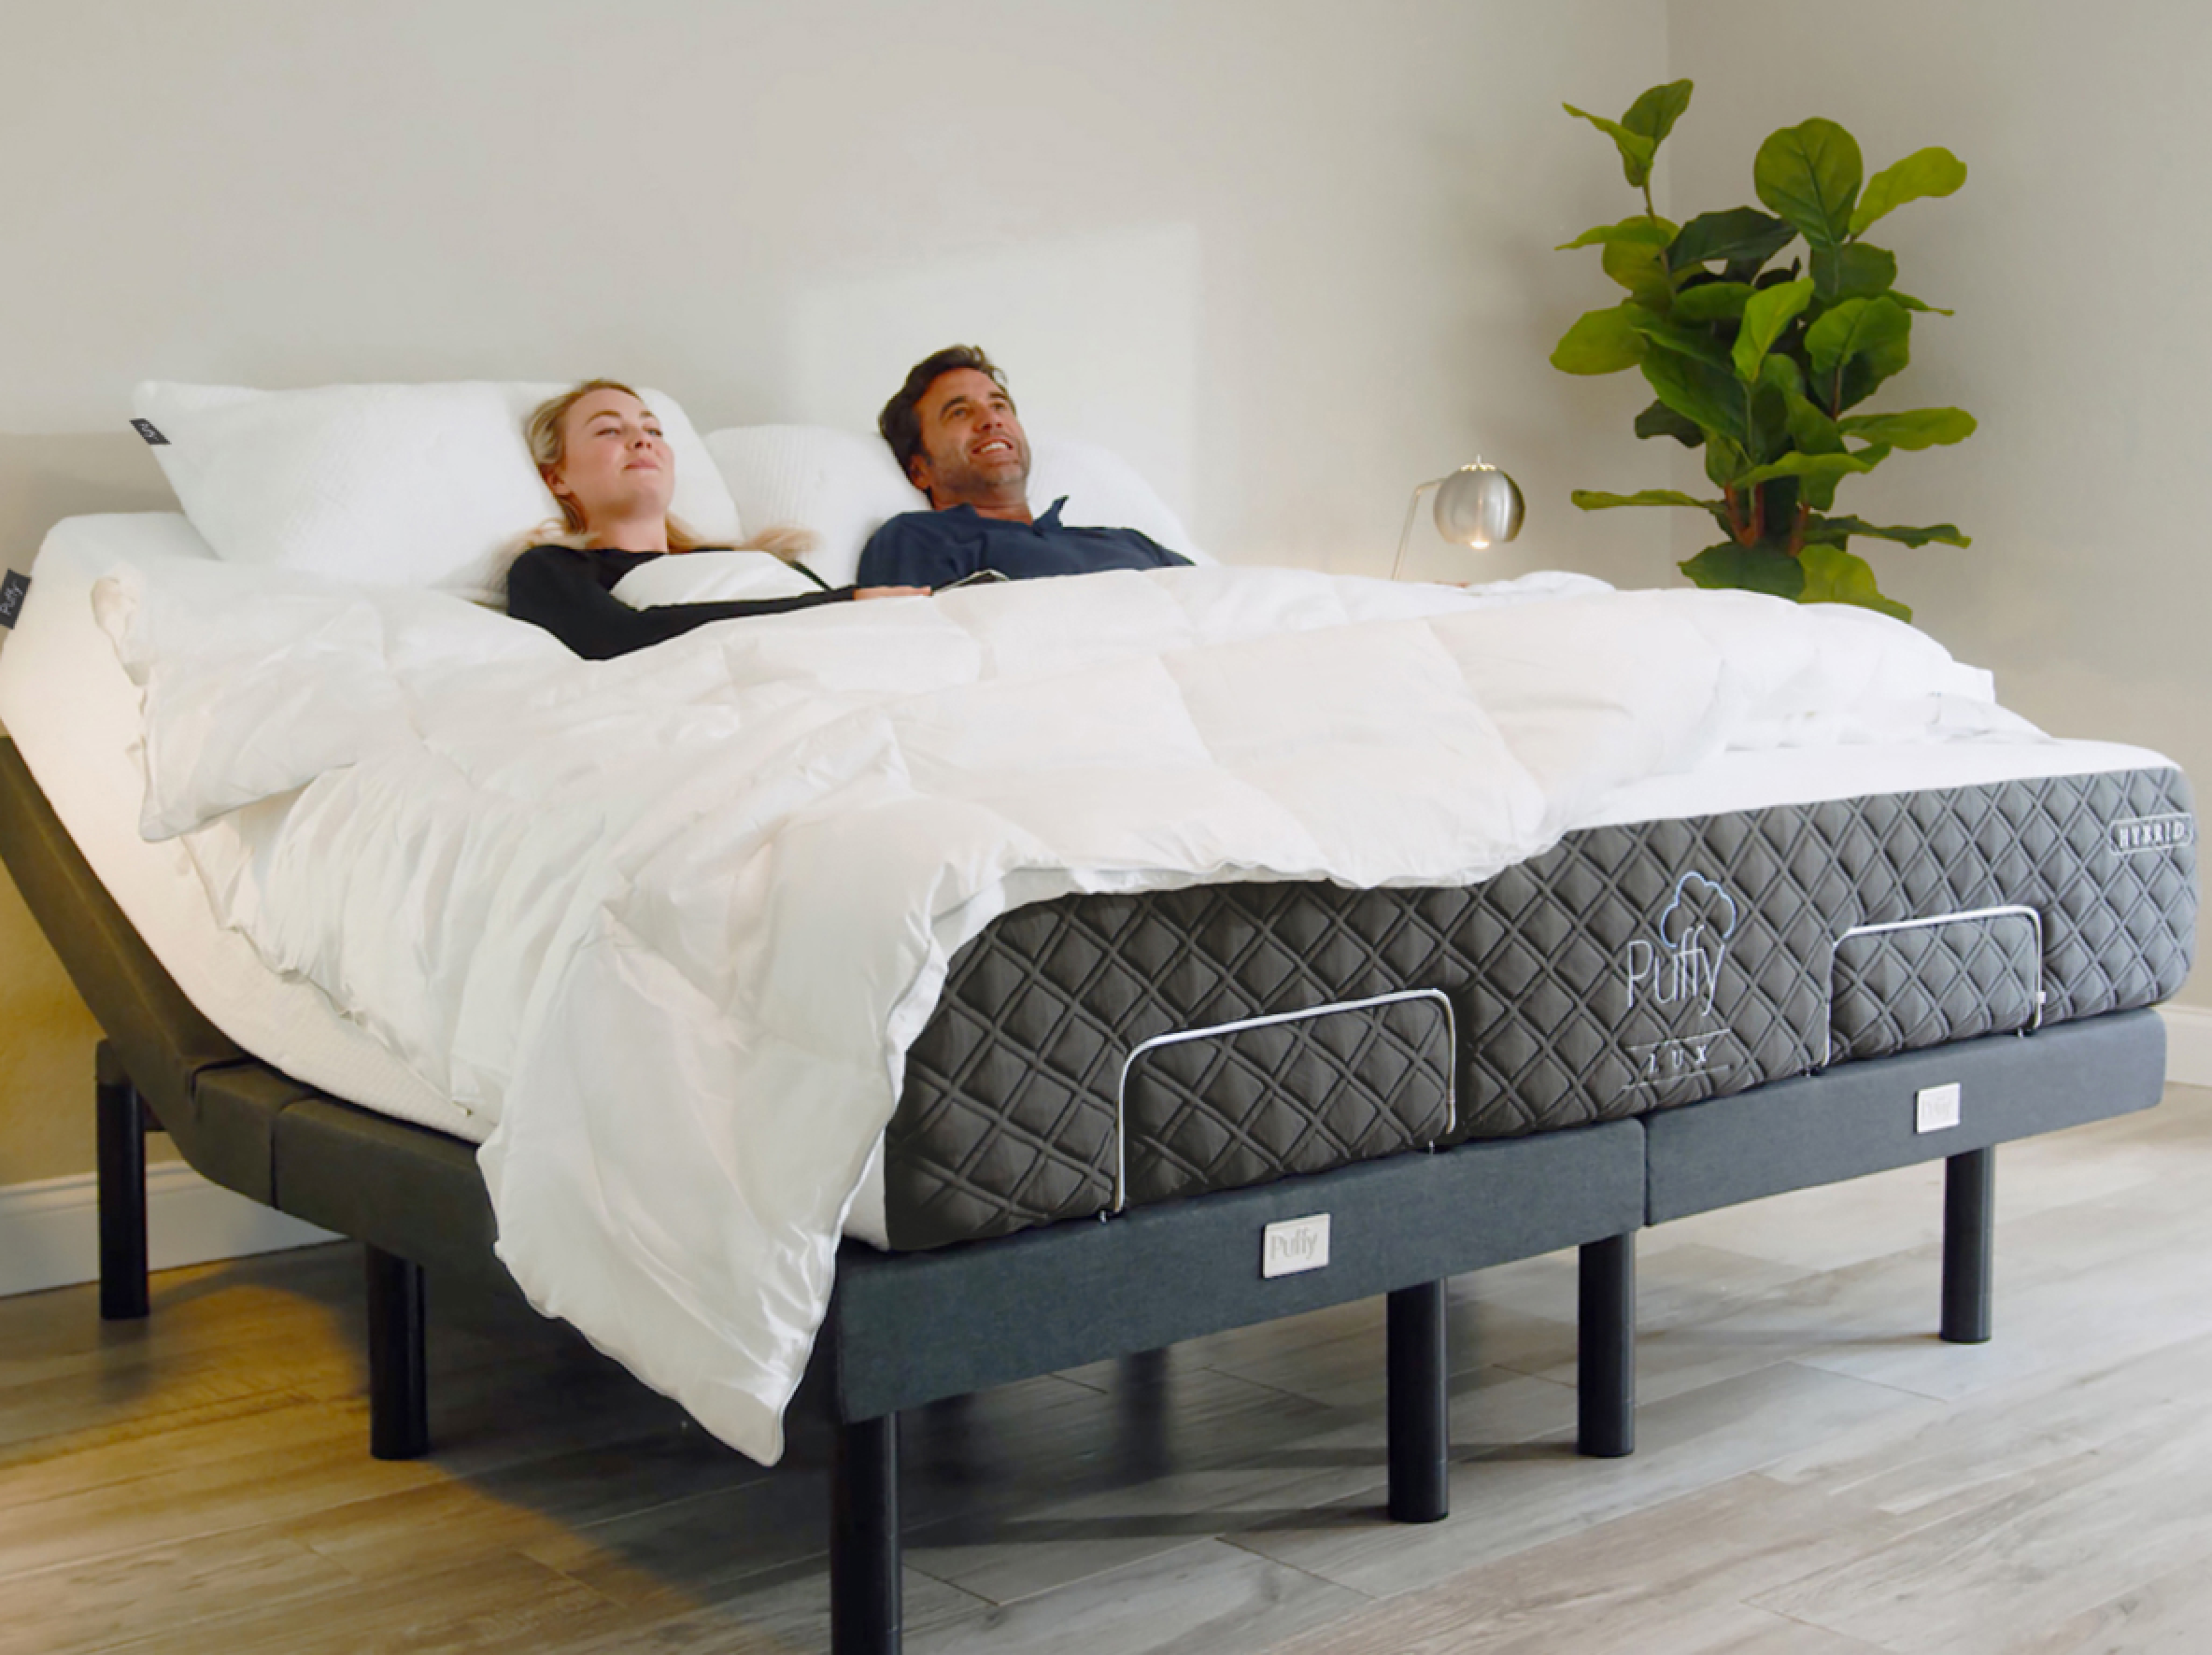 10 Health Benefits of Using an Adjustable Bed Frame